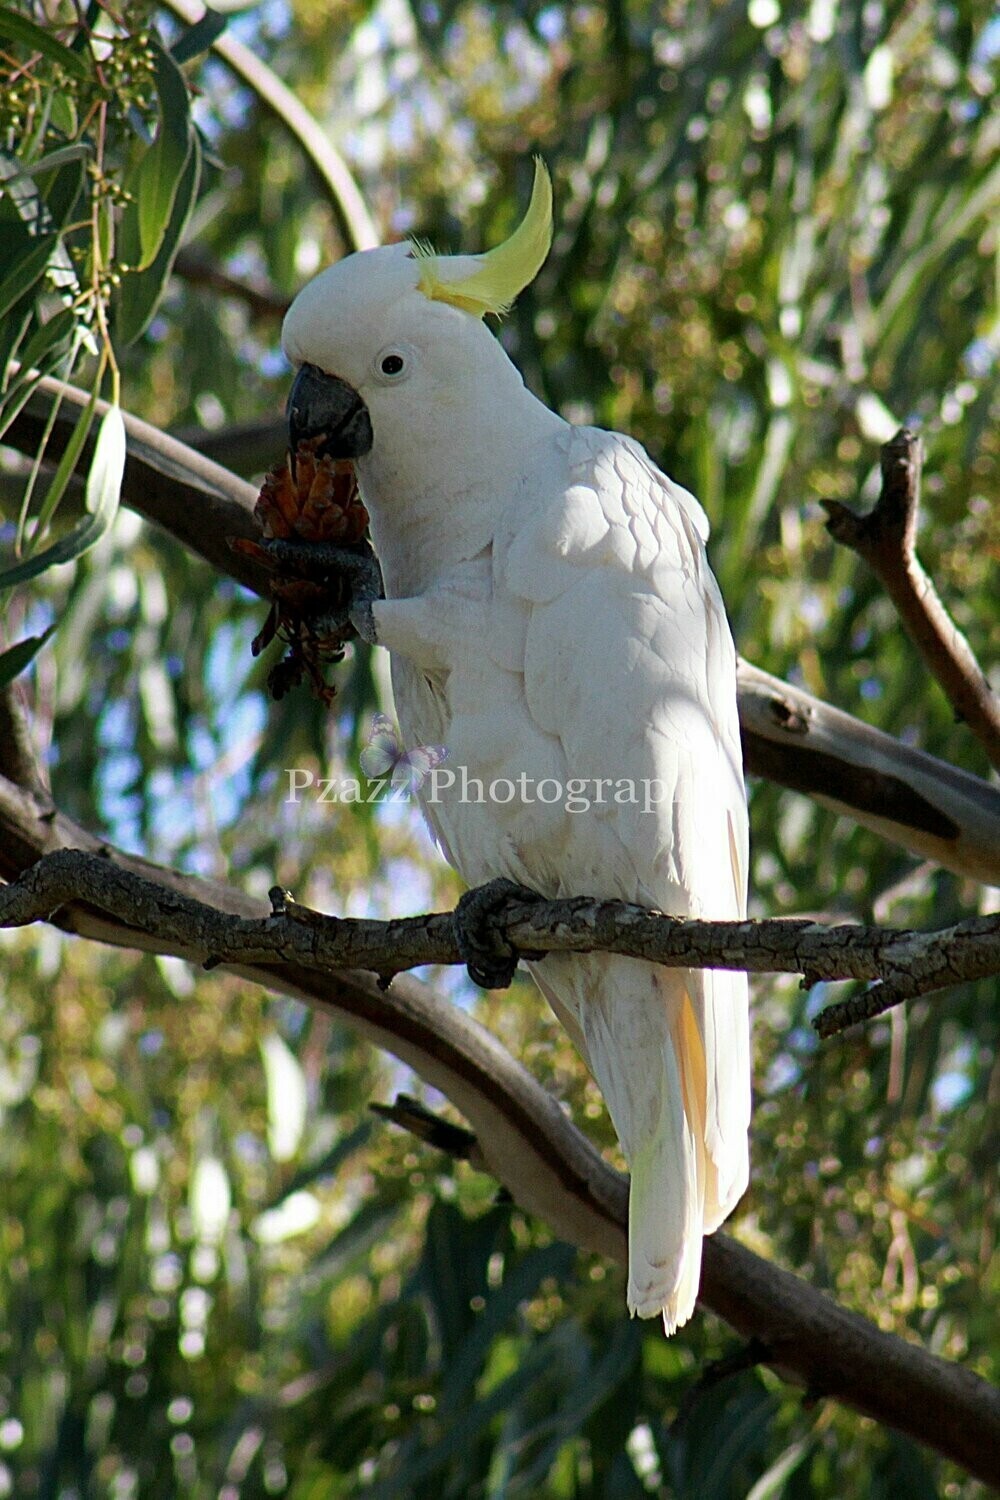 Pzazz Photography - Sulphur crested cockatoo - Specially ordered for you. Delivery is approximately 4 - 6 weeks.